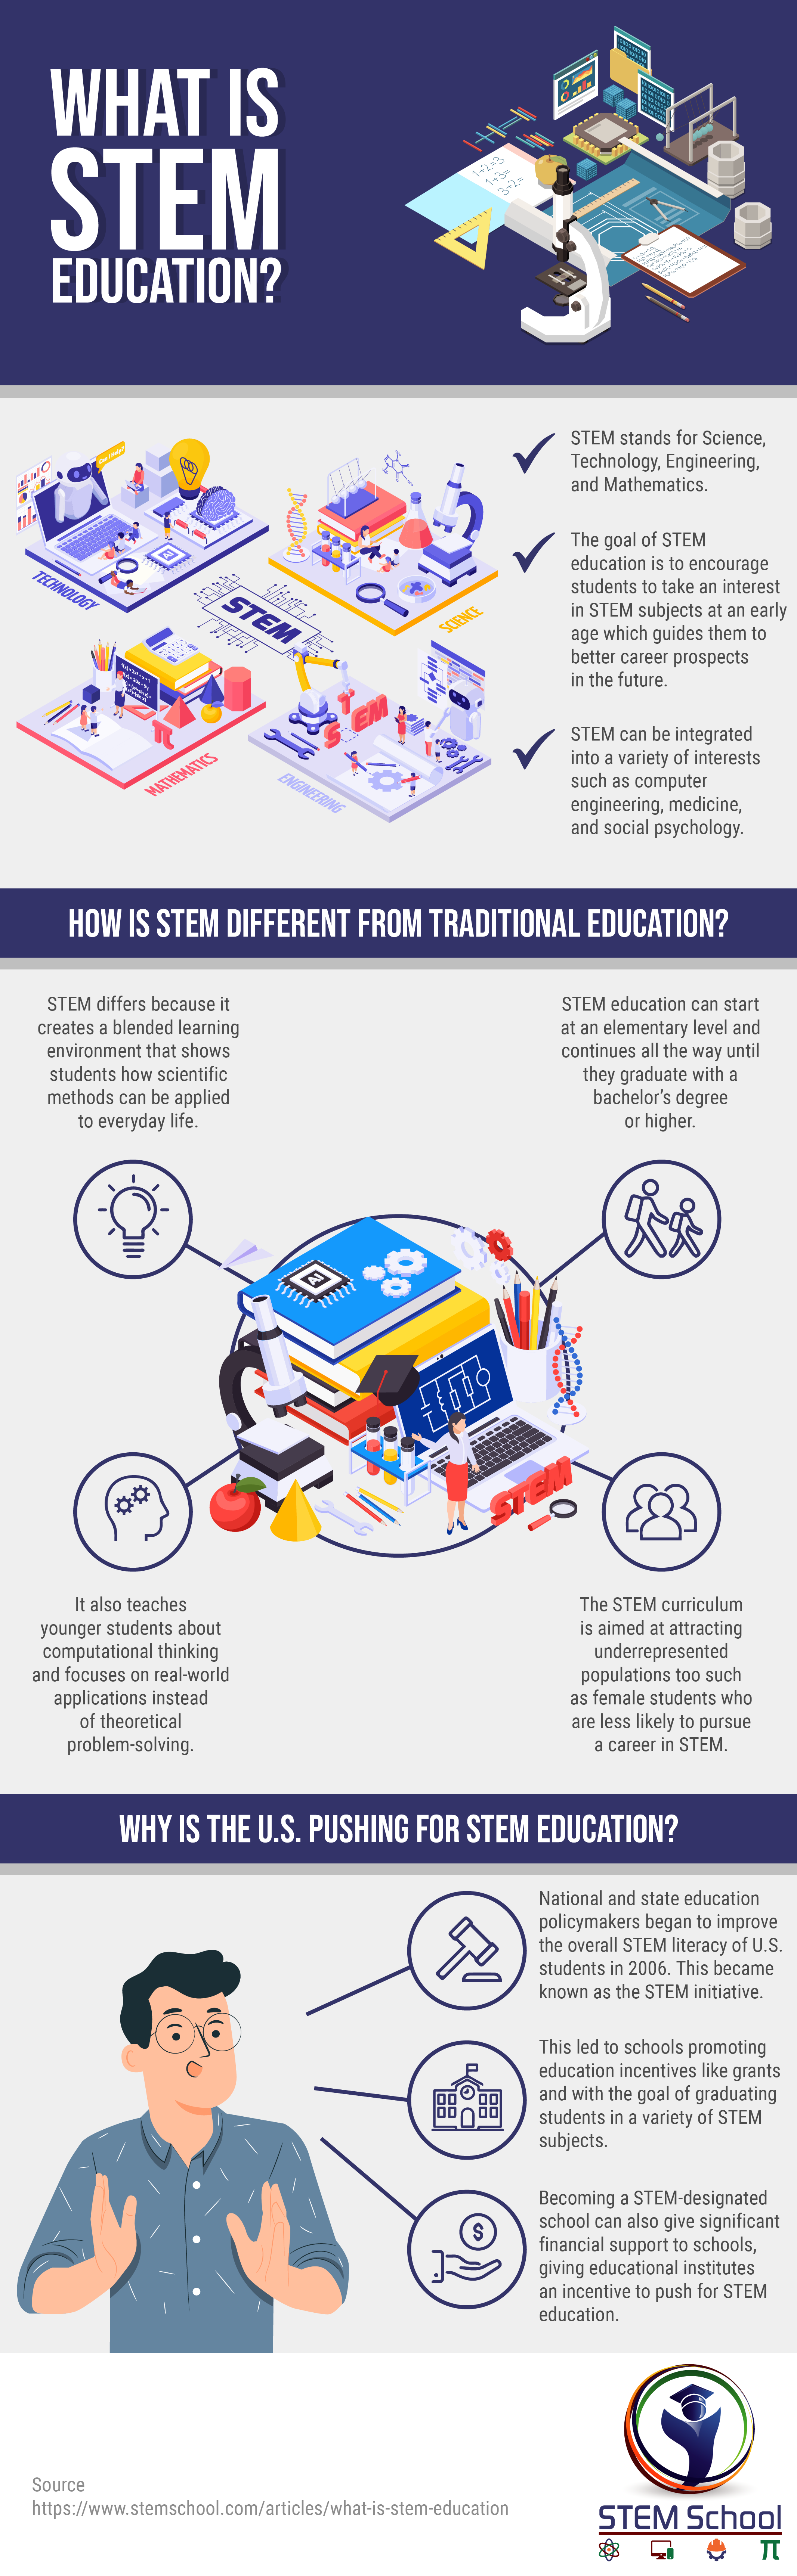 stem education meaning